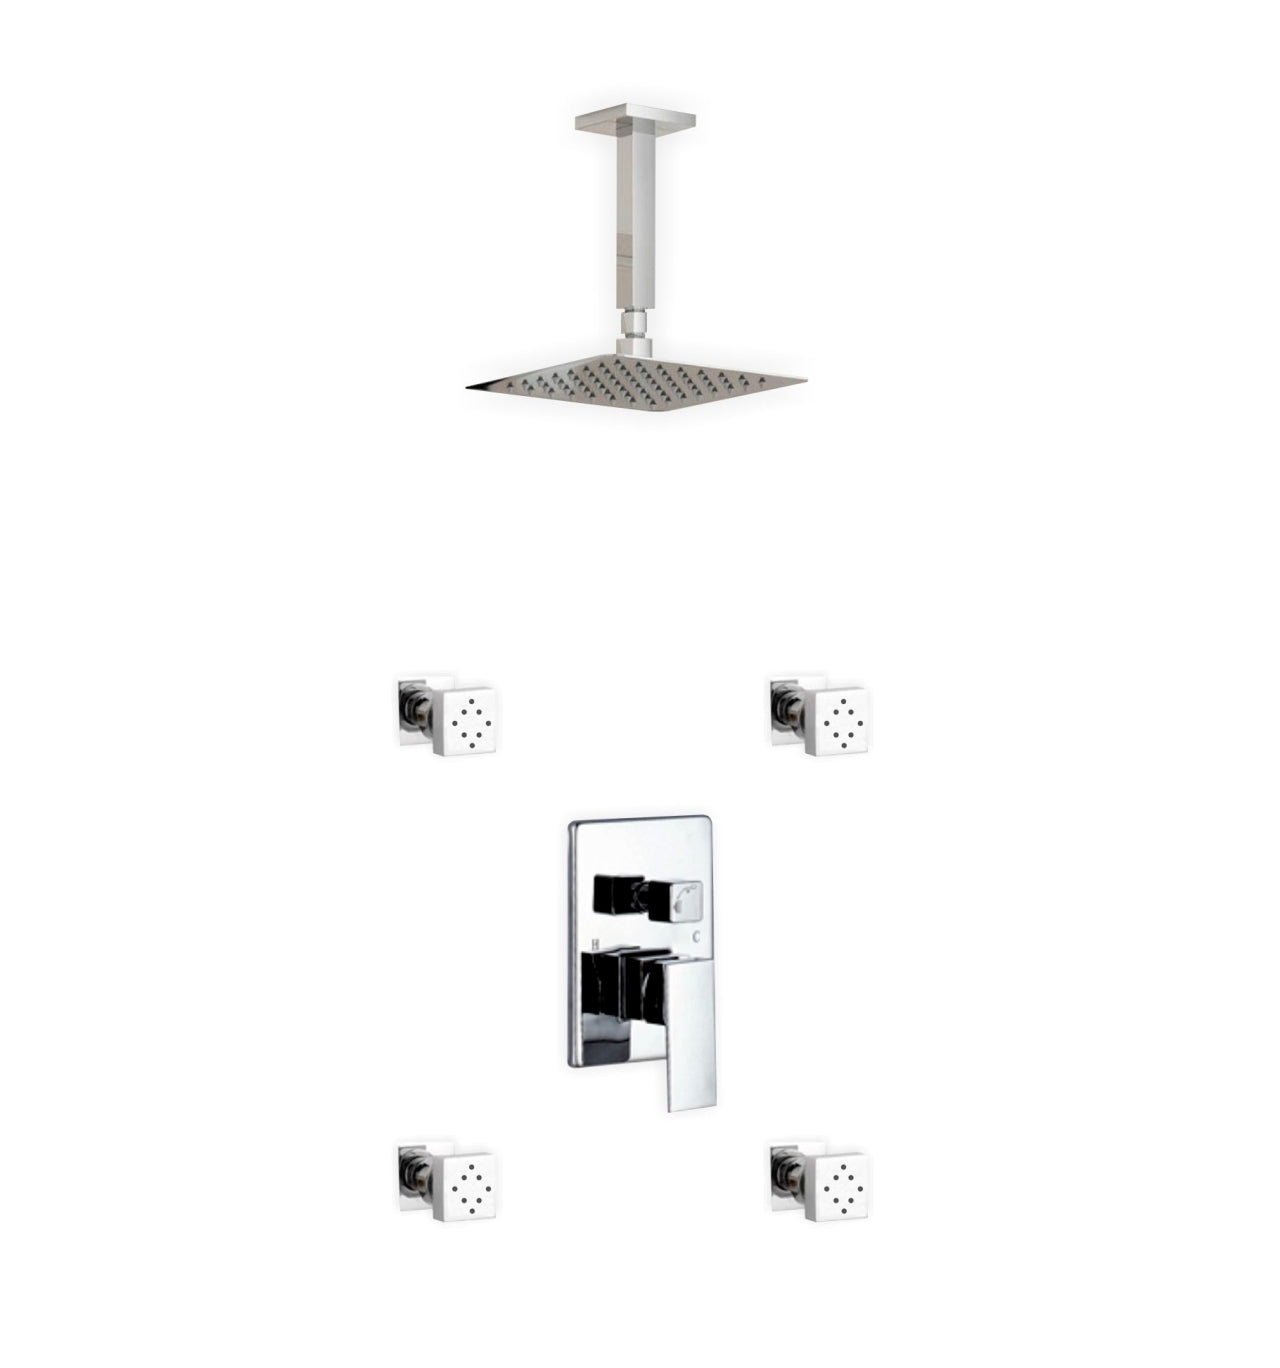 Aqua Piazza Brass Shower Set with Ceiling Mount Square Rain Shower and 4 Body Jets - Home and Bath Depot